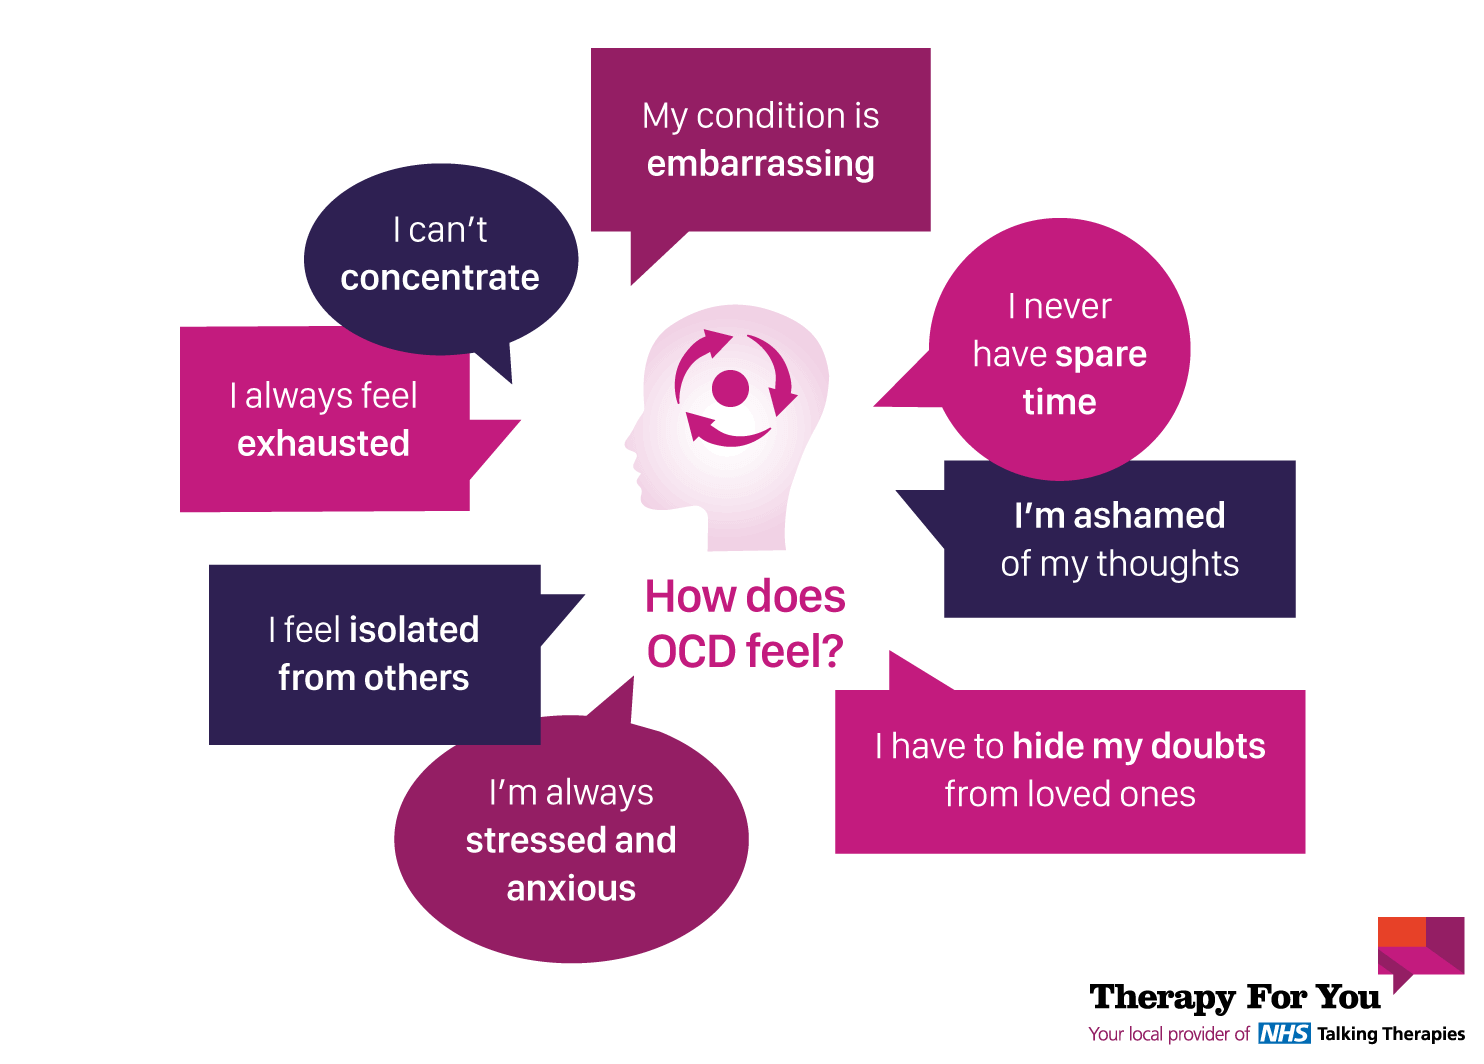 Infographic showing how OCD feels and affects people who suffer with it